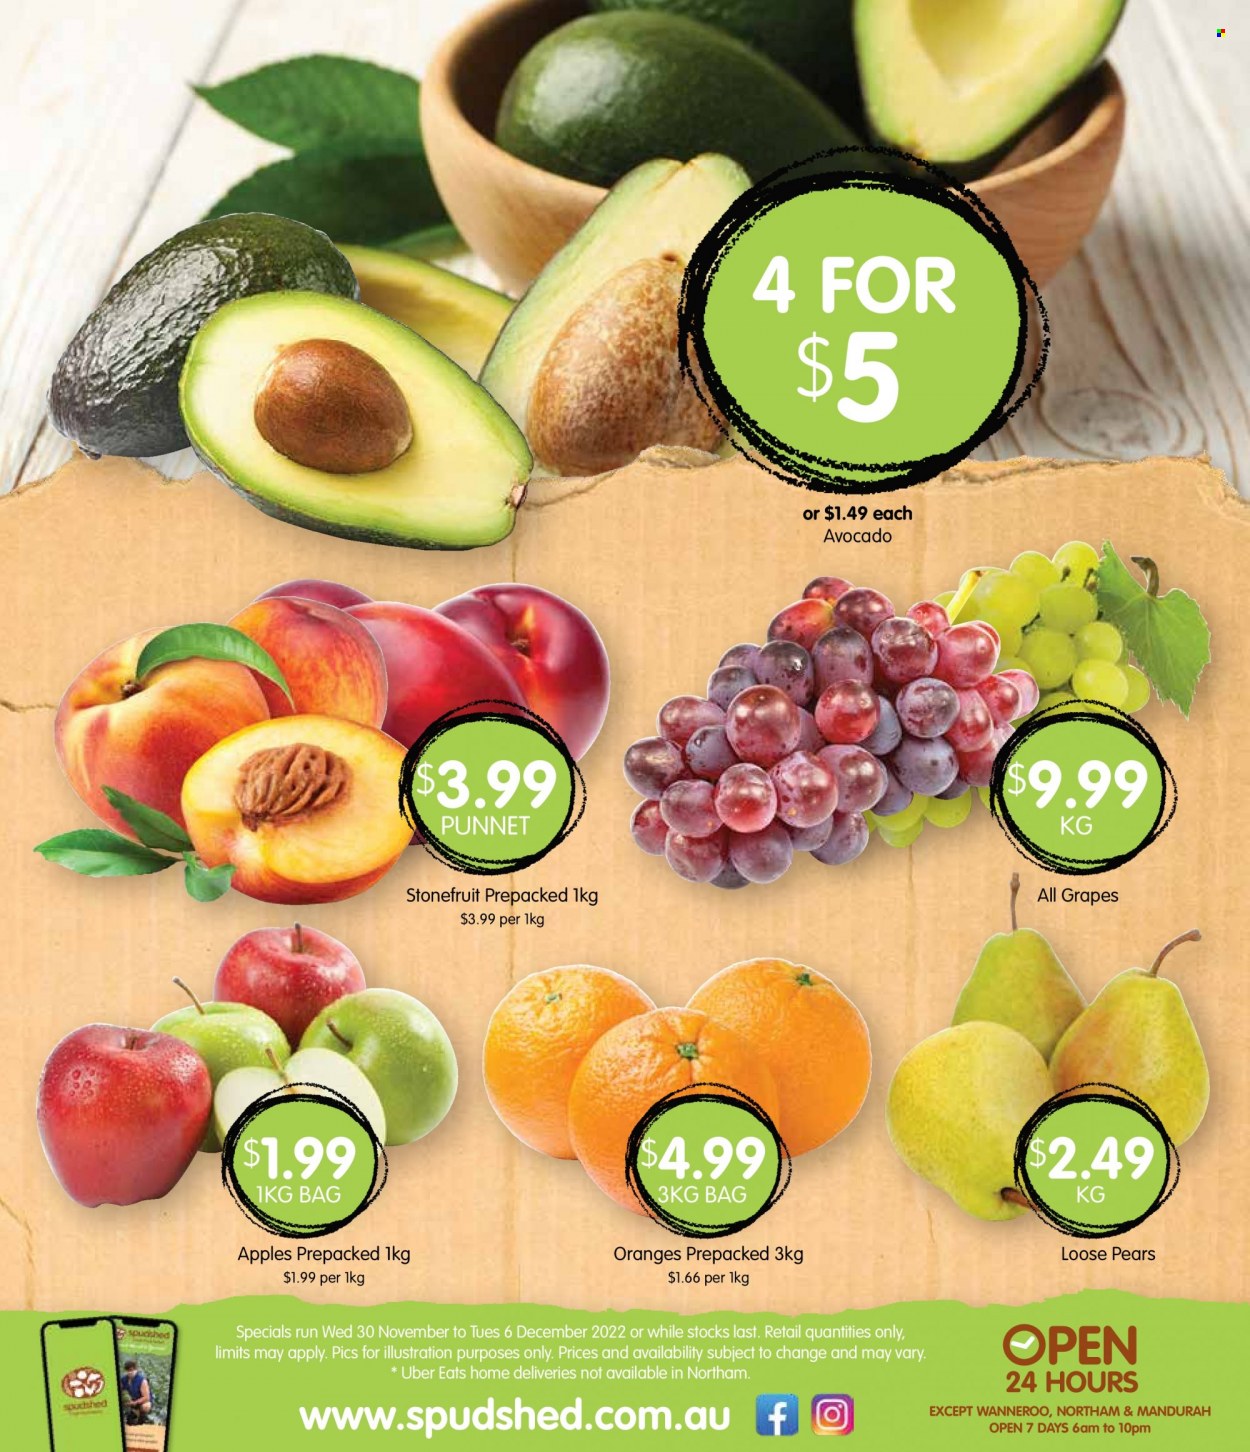 thumbnail - Spudshed Catalogue - 30 Nov 2022 - 6 Dec 2022 - Sales products - avocado, grapes, pears, oranges, apples. Page 9.